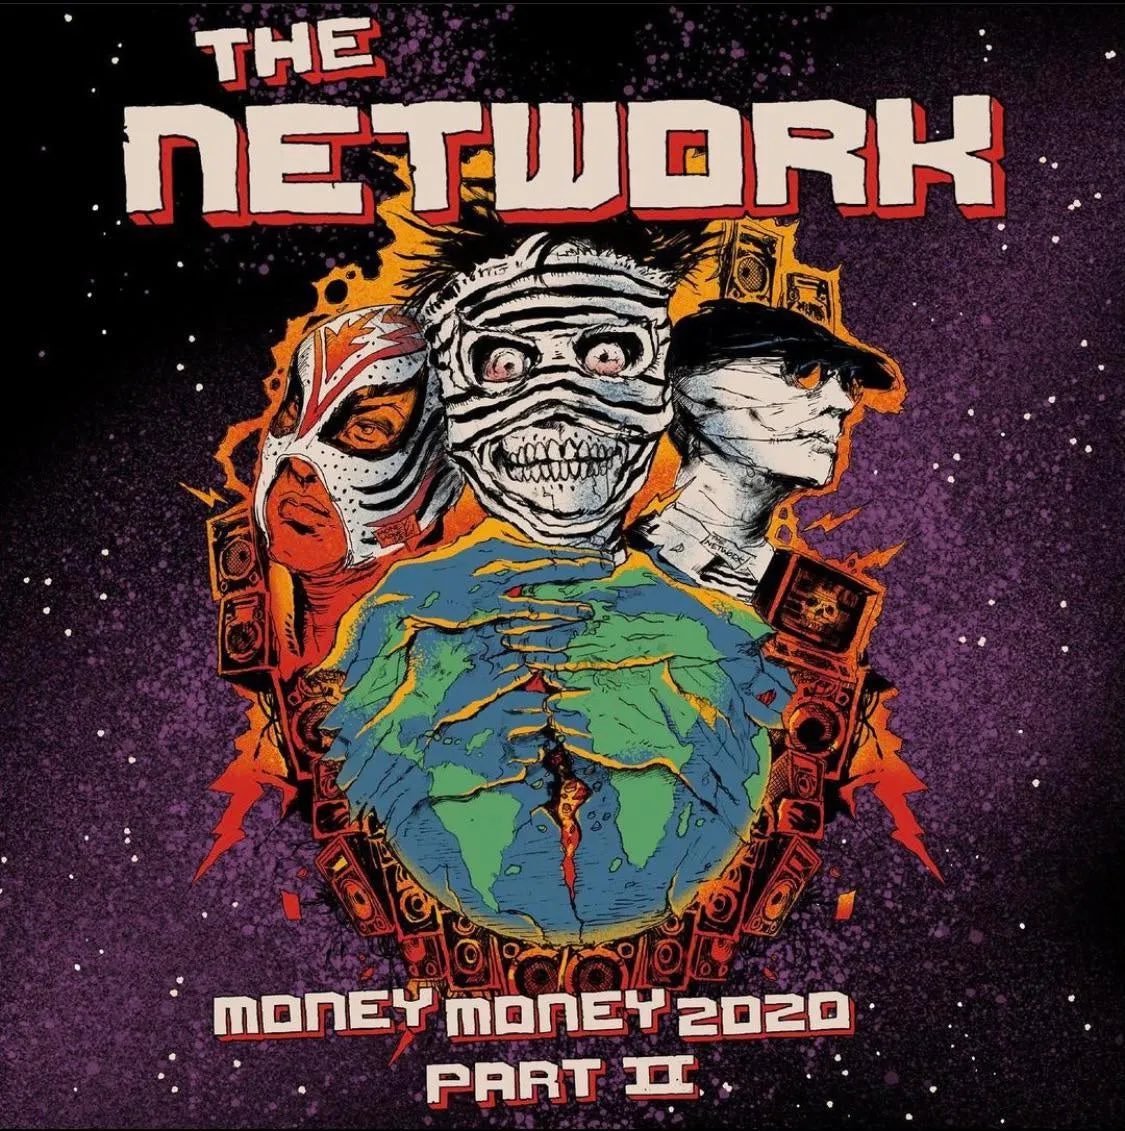 Crap I missed yesterdays. Anyways: 8. The Network - Money Money 2020 pt 2The last thing I expected in 2020 was another network album but it turned out pretty good! Love the electronic sort of style. Glad to have them (totally not Green Day ) back